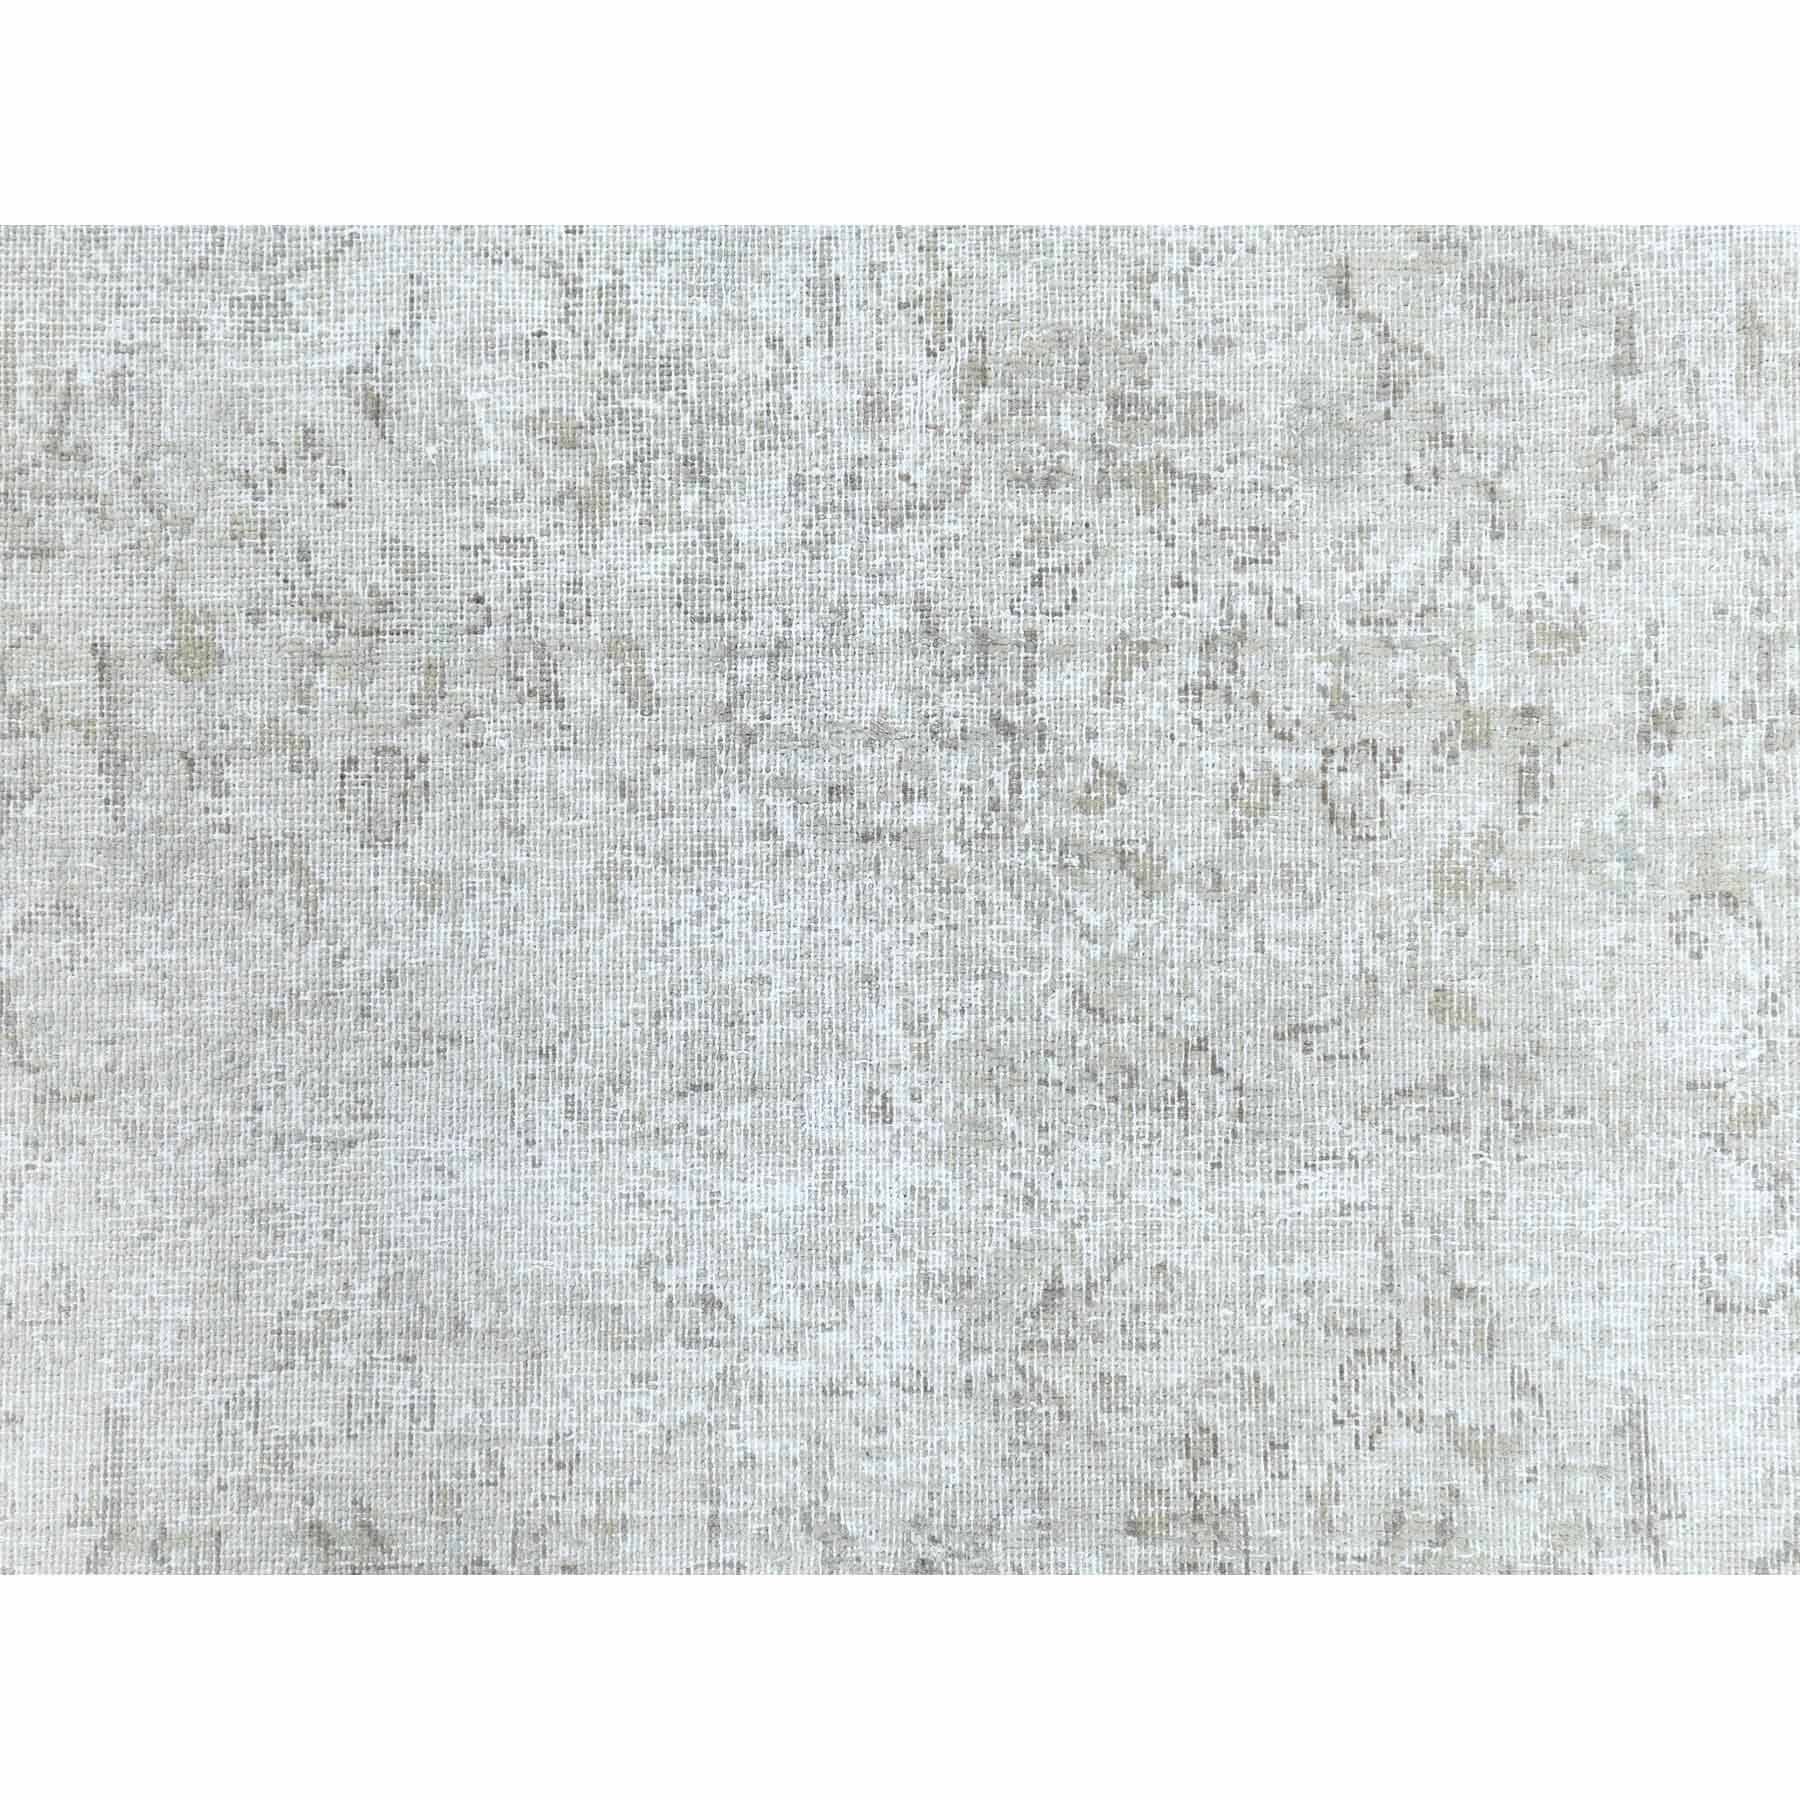 Overdyed-Vintage-Hand-Knotted-Rug-308620